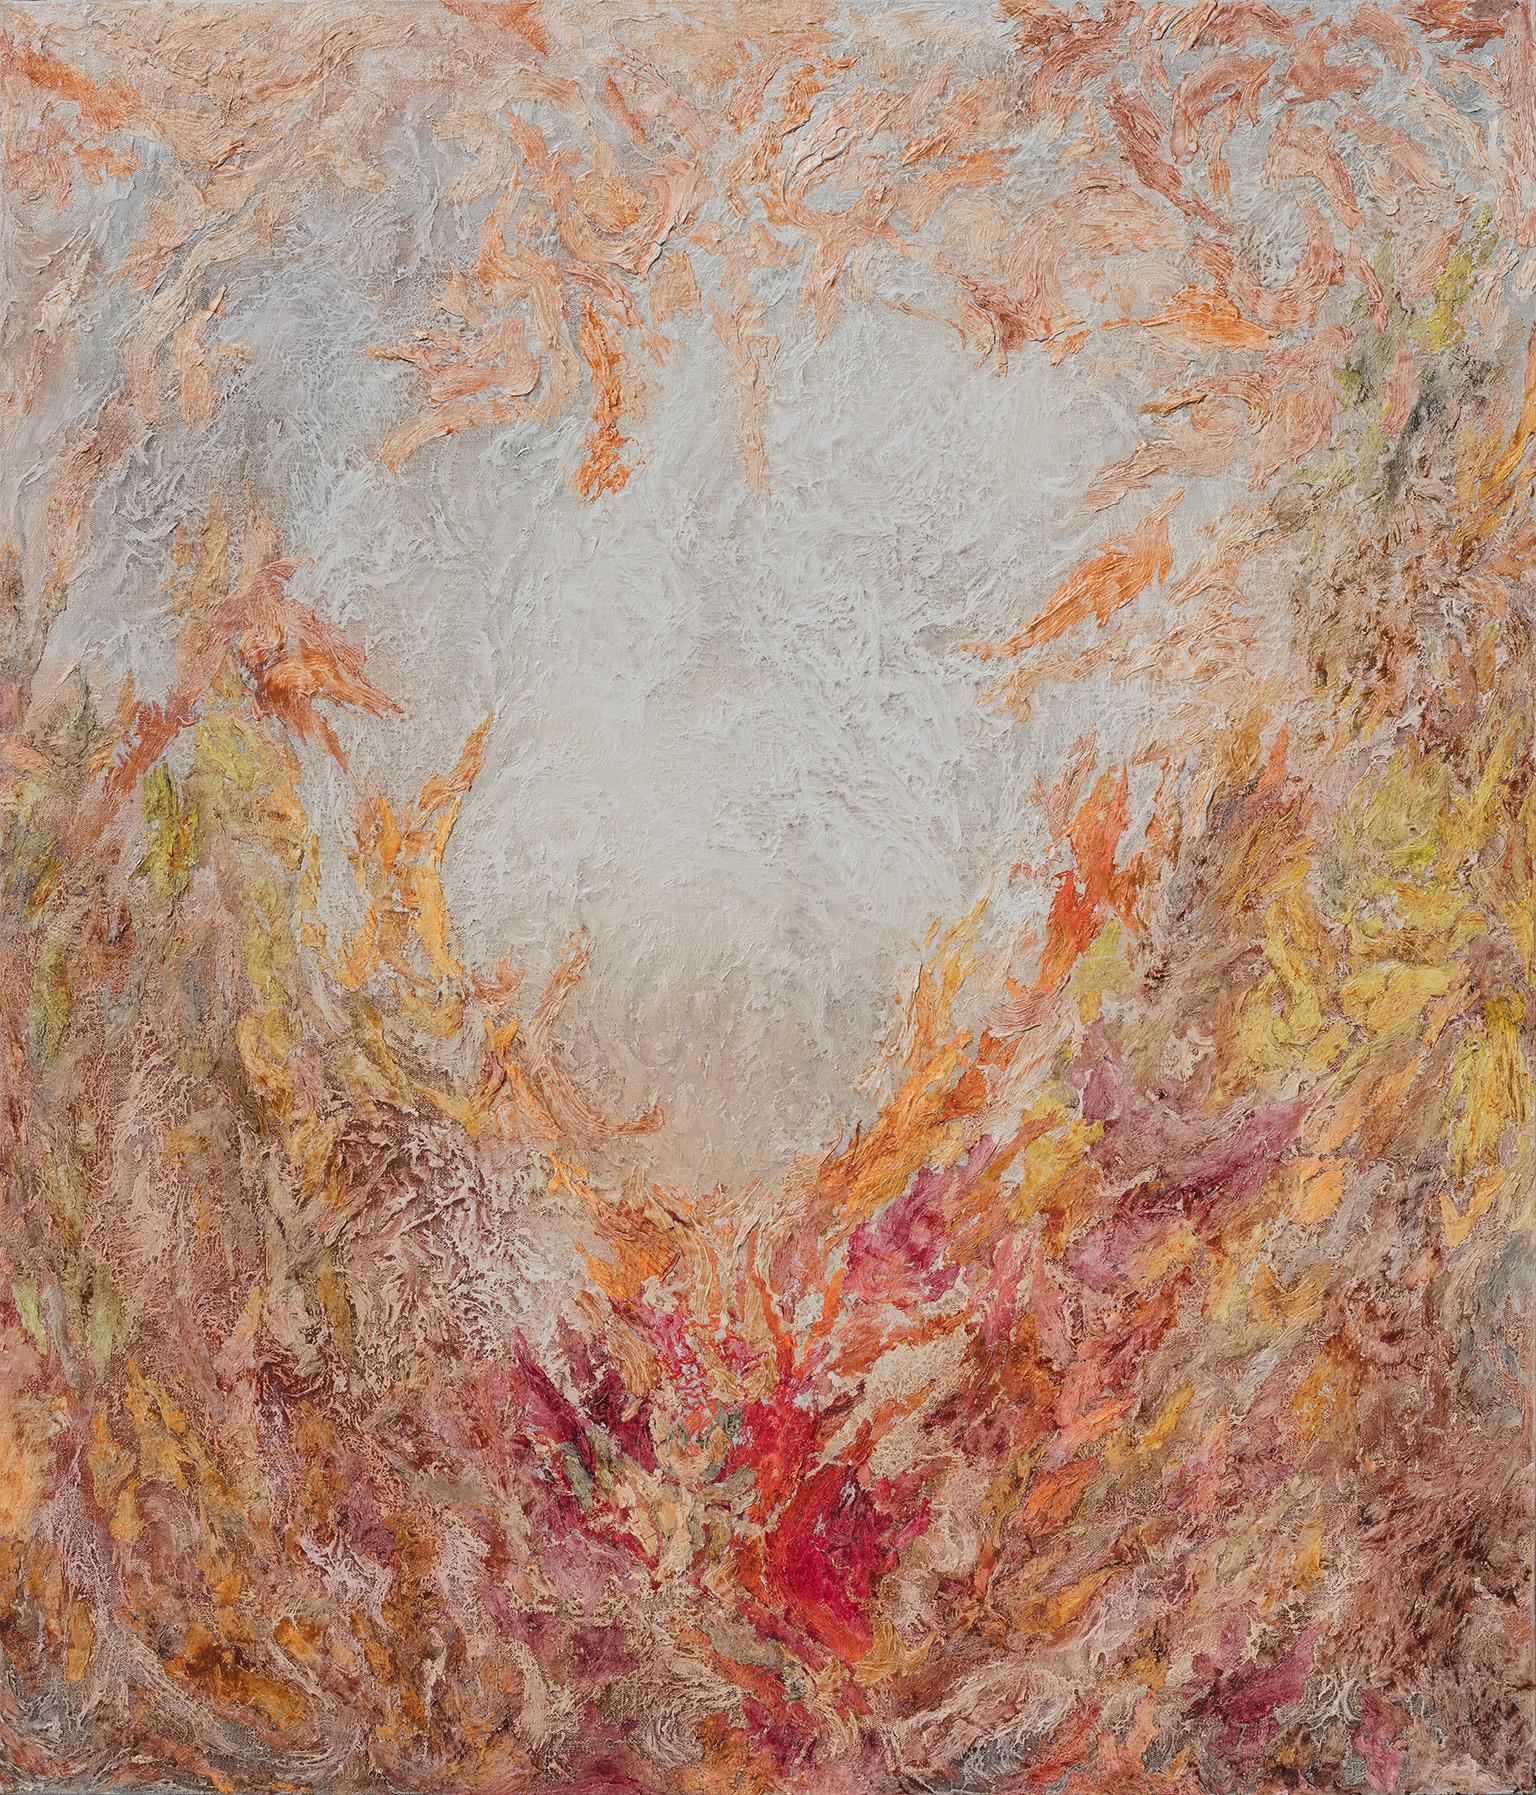 Ruggero Vanni Landscape Painting - From Matter to Energy - Abstract Expressionist Painting with Pastel Warm Colors